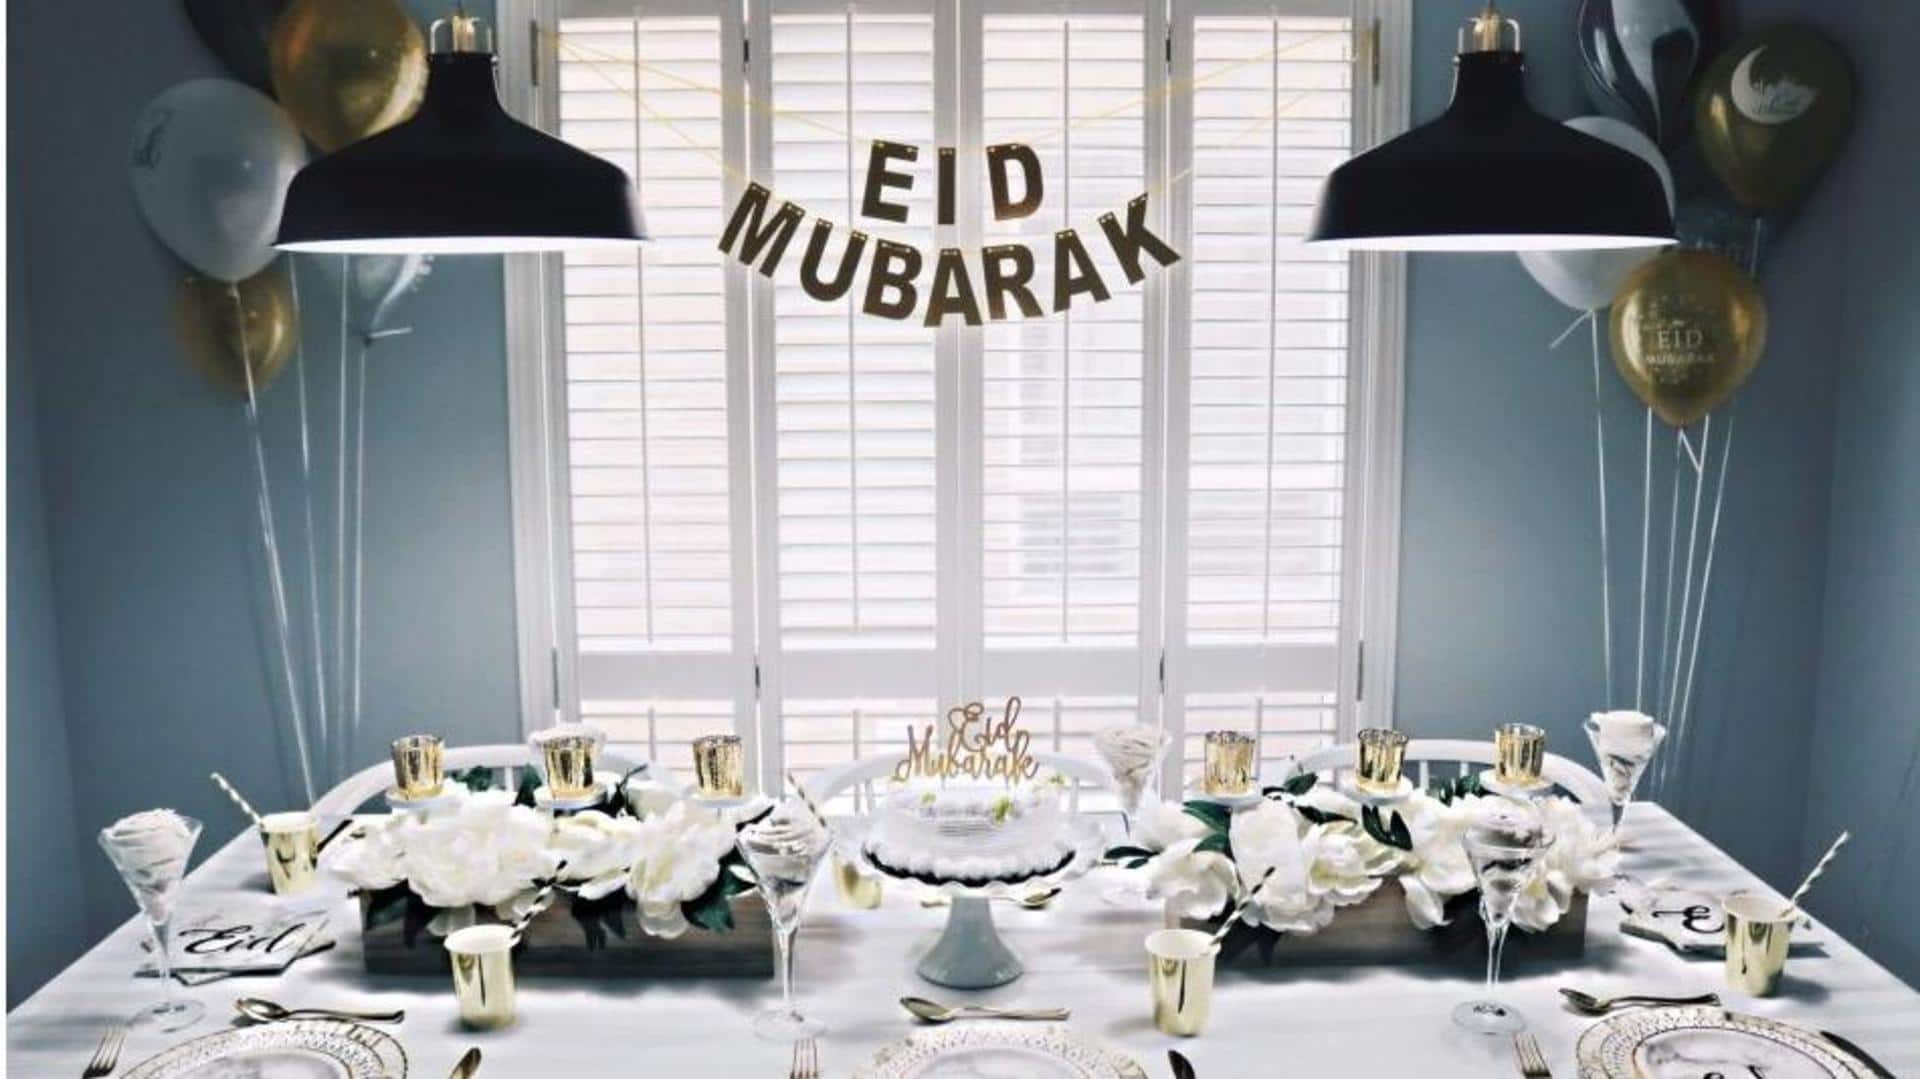 Here's how to organize a fun Eid party at home